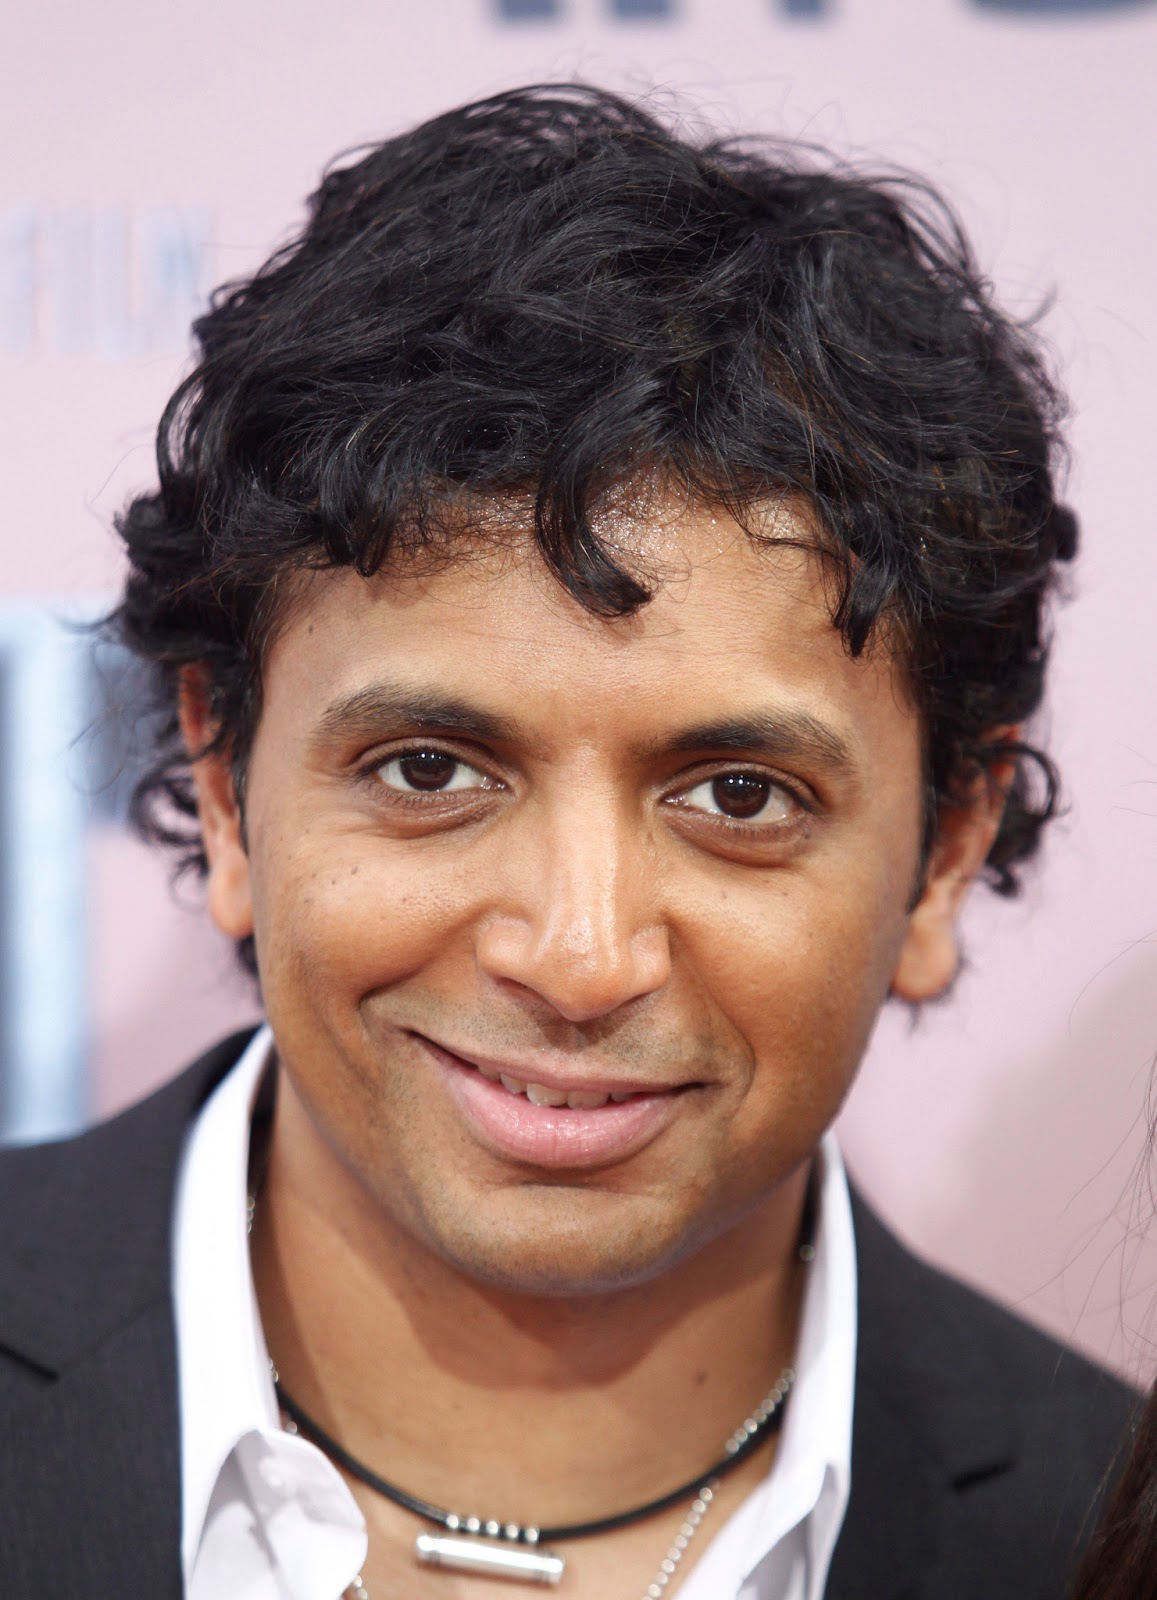 M Night Shyamalan has made a profit from every movie he's made since the Sixth Sense (even though his last 4 movies have a *combined* score of <a href="http://ebaum.it/1sryjO6" target="_blank">86% on Rotten Tomatoes</a>)